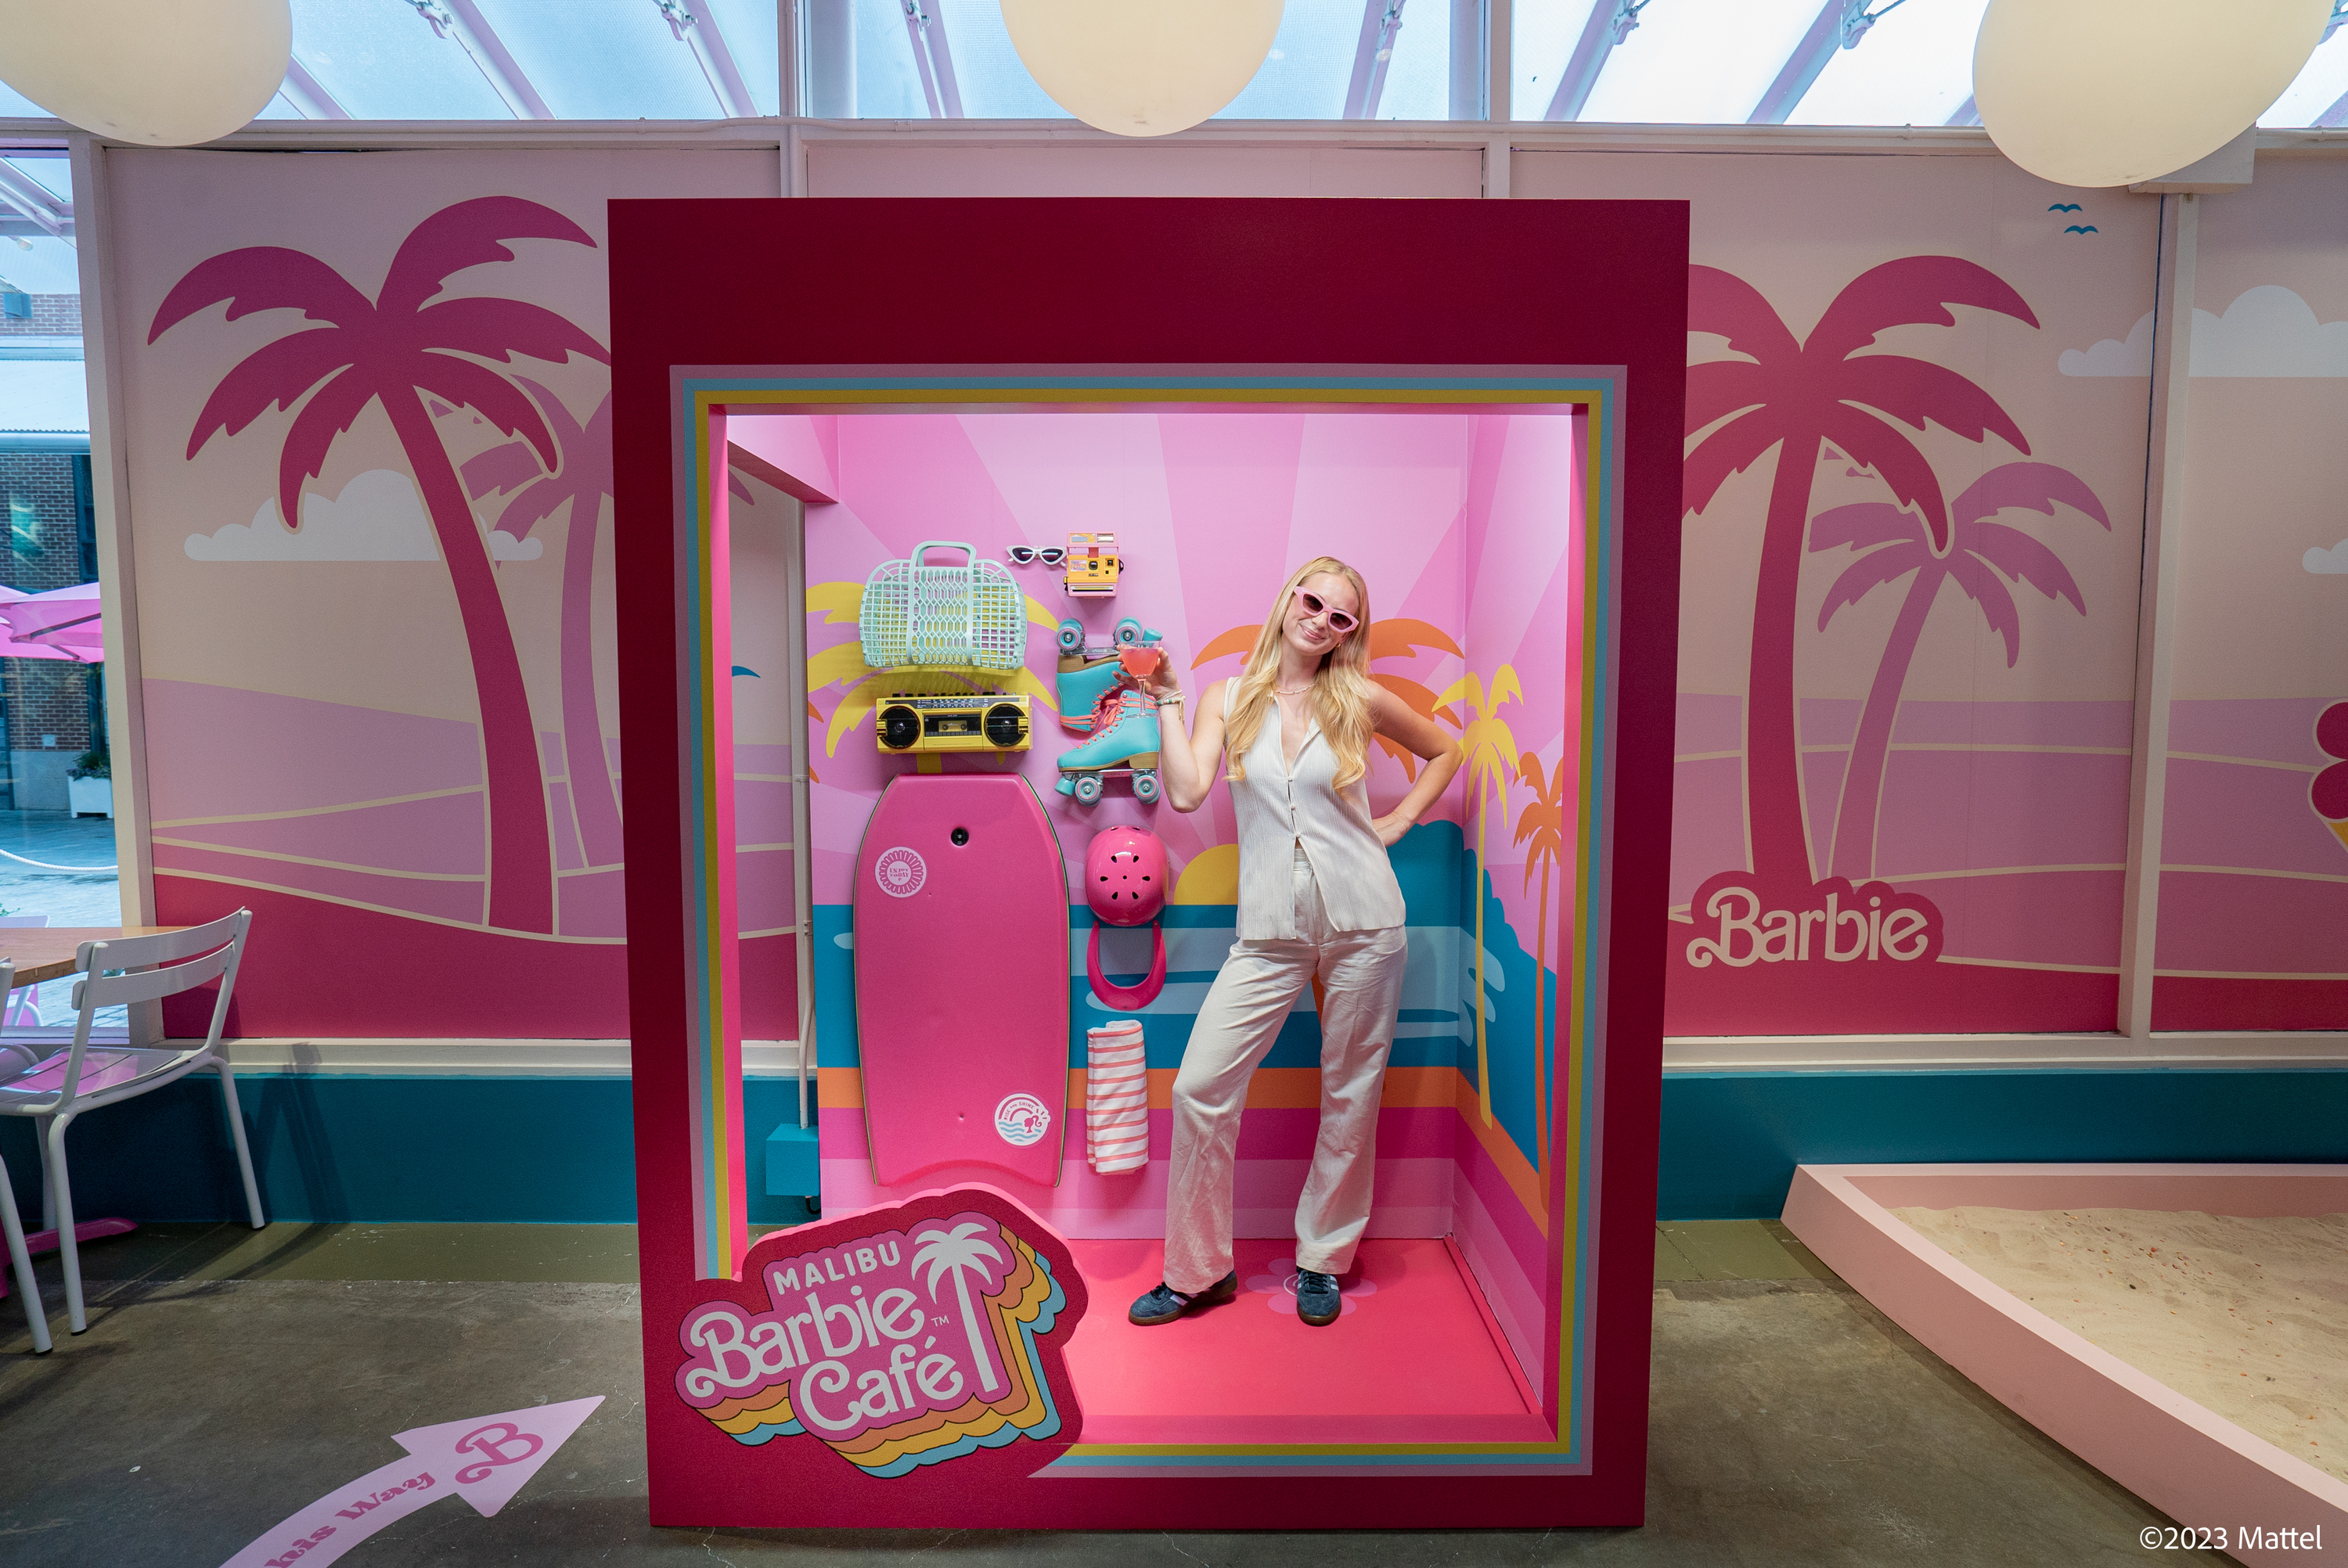 Malibu Barbie Cafe NYC: First Look Of Immersive Dining Experience Open in Manhattan